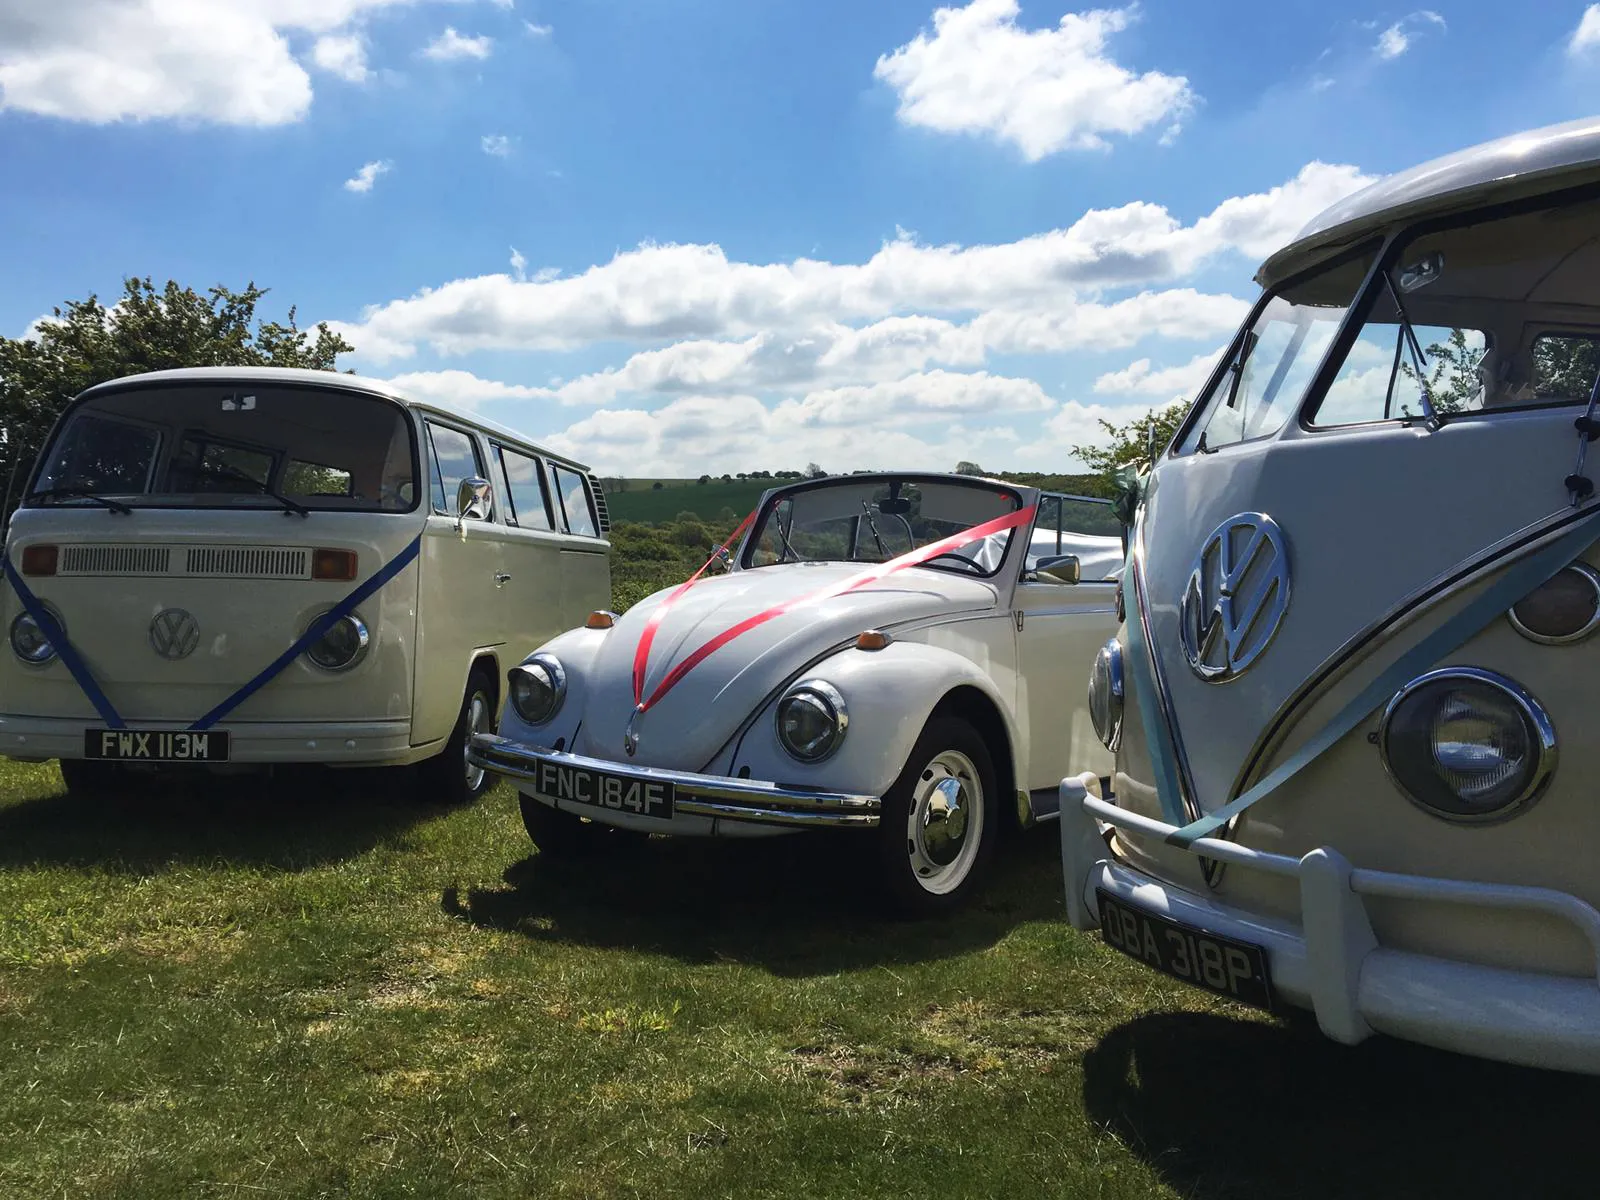 Two Campervans and one Beetle Convertible in a green field attending a bohemian wedding. All 3 vehicles have matching wedding ribbon decoration in White